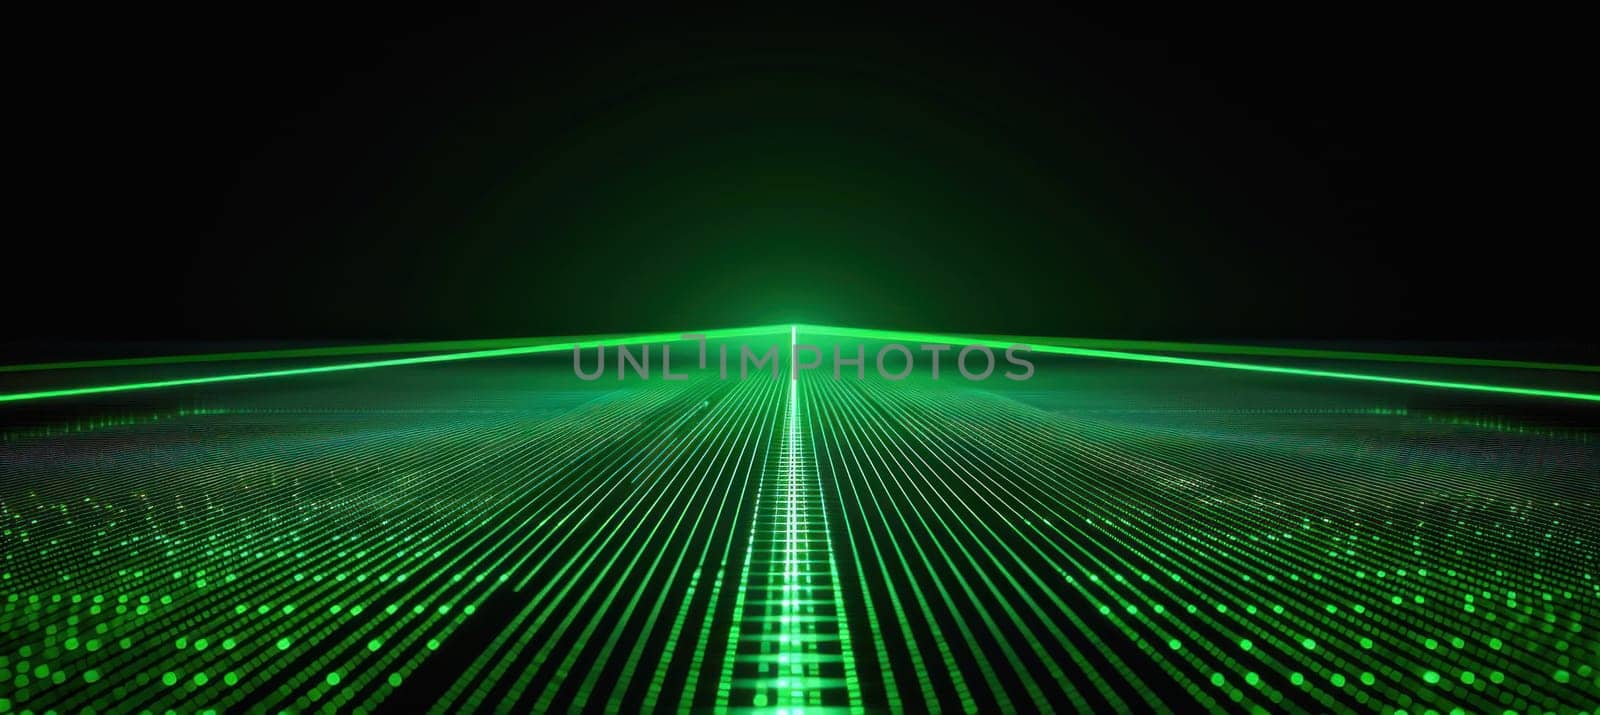 A vibrant green light shines against a dark background, creating a striking contrast in the visual effect lighting